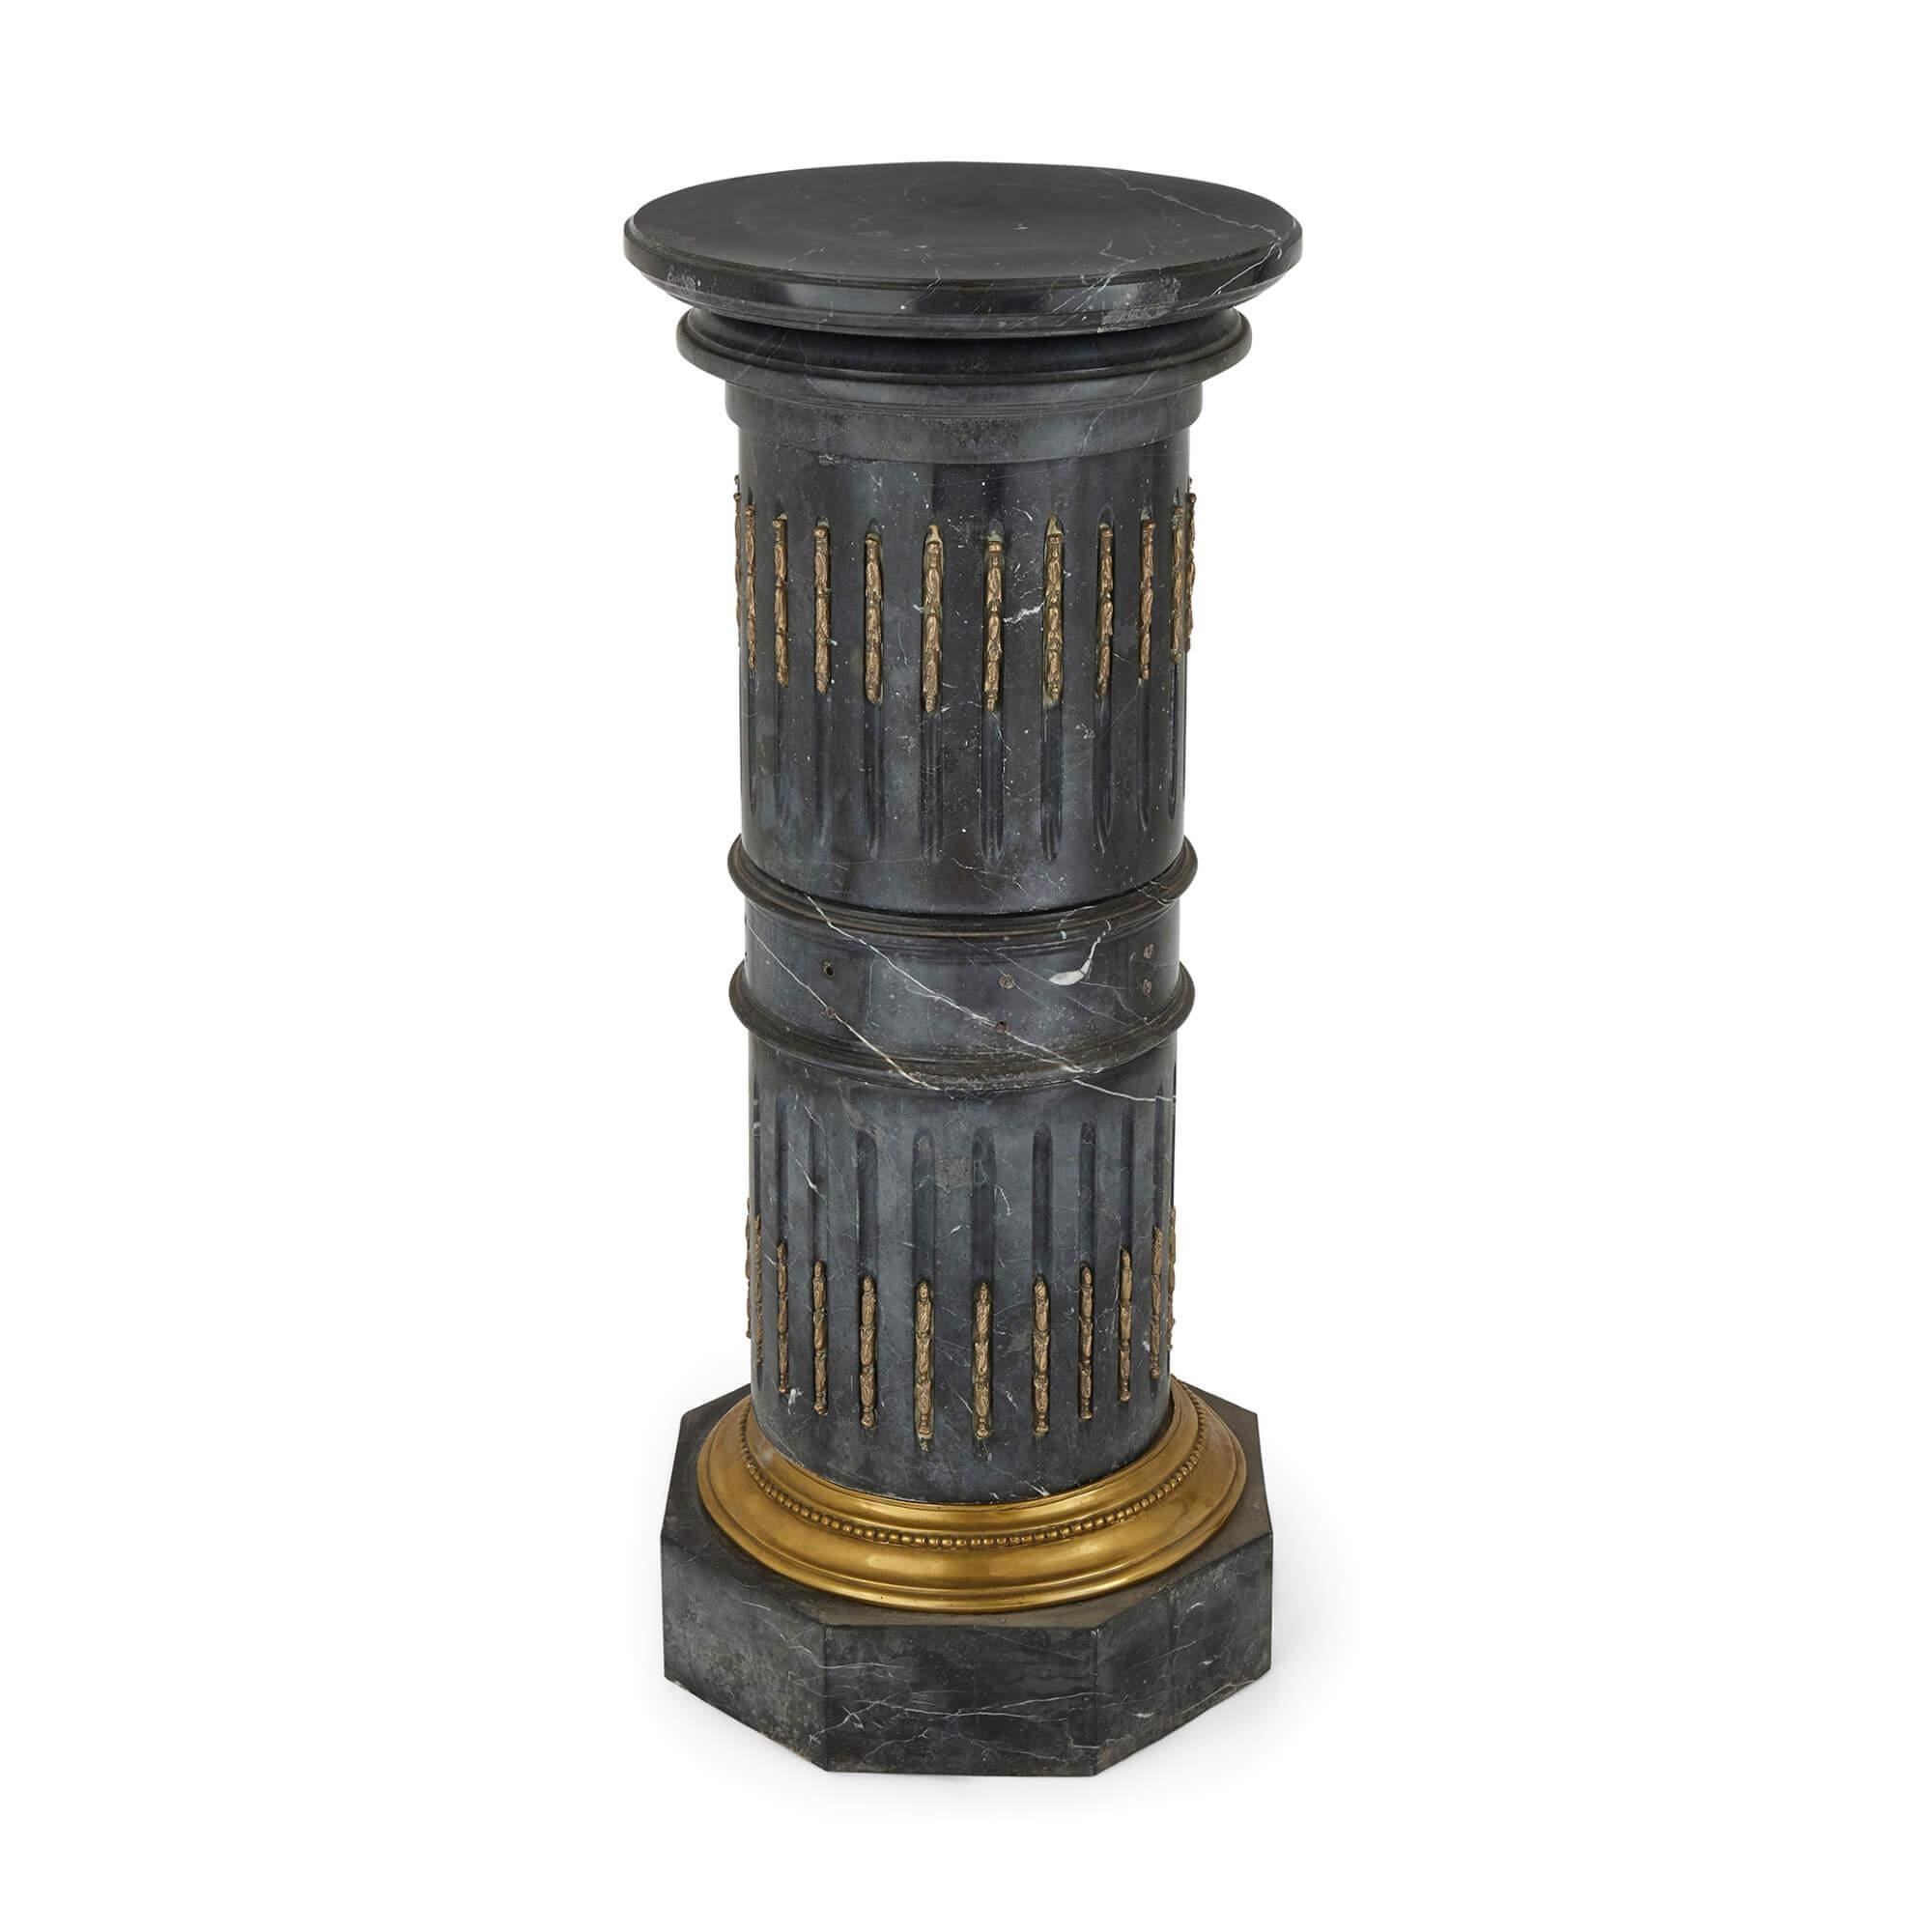 A pair of gilt-bronze and black marble antique Neoclassical pedestals
French, 19th Century
Height 103cm, diameter 45cm

Mounted upon large hexagonal bases adorned with gilt-bronze, this fine pair of Neoclassical pedestals are of baluster form, and